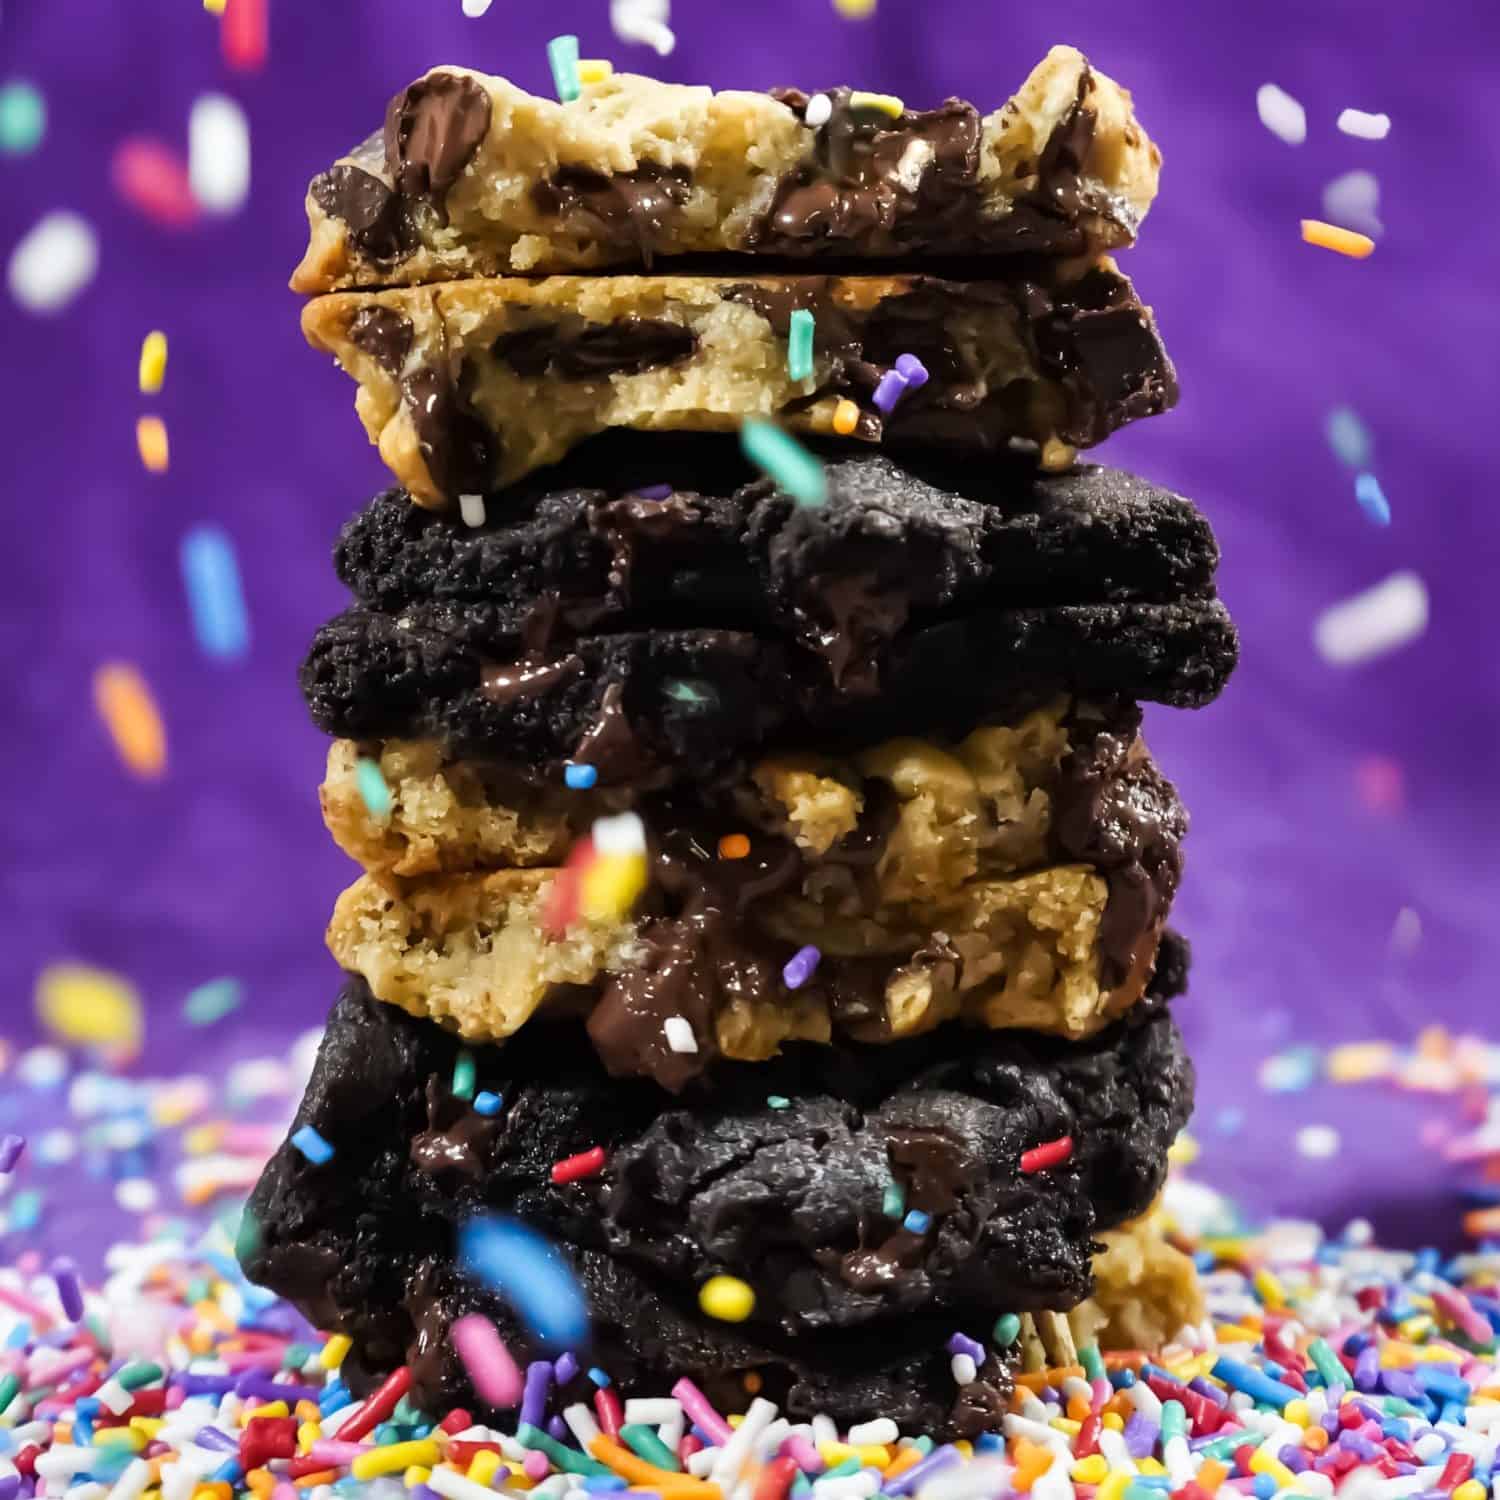 Get Free Cookie Every Day with Insomnia Cookies' CookieMagic First